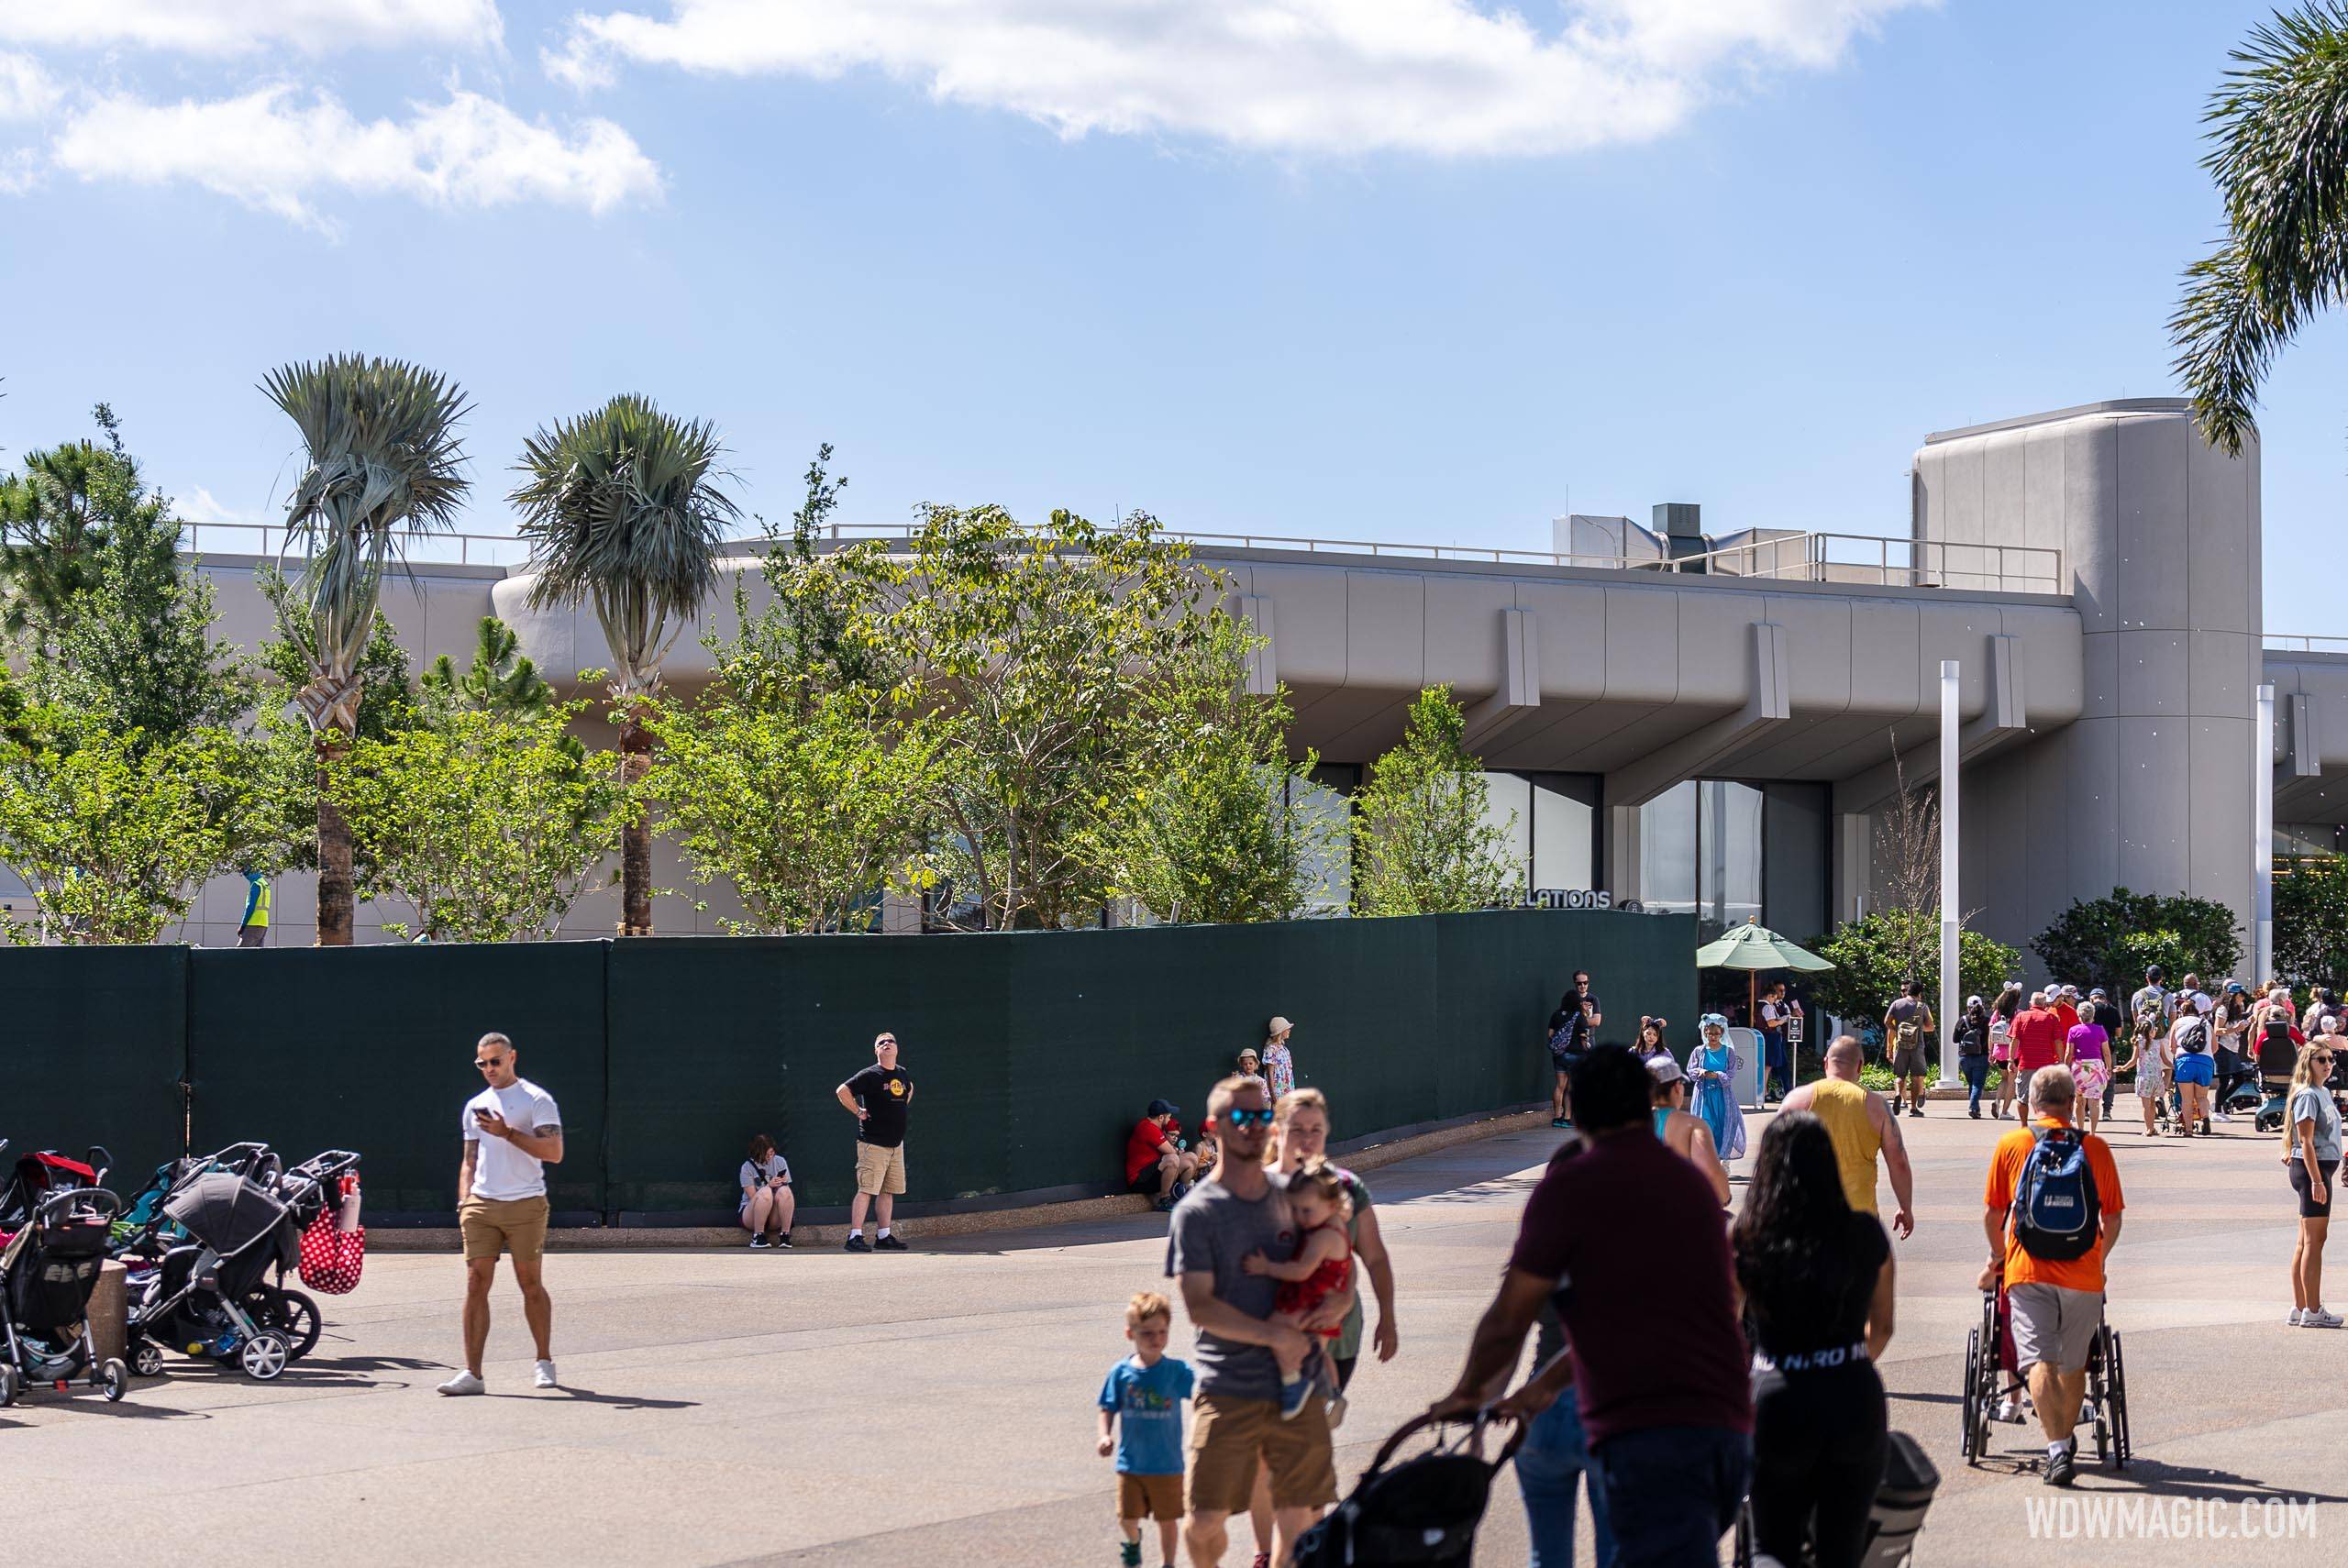 New landscaping arrives in the long-vacant area near EPCOT's Guest Relations